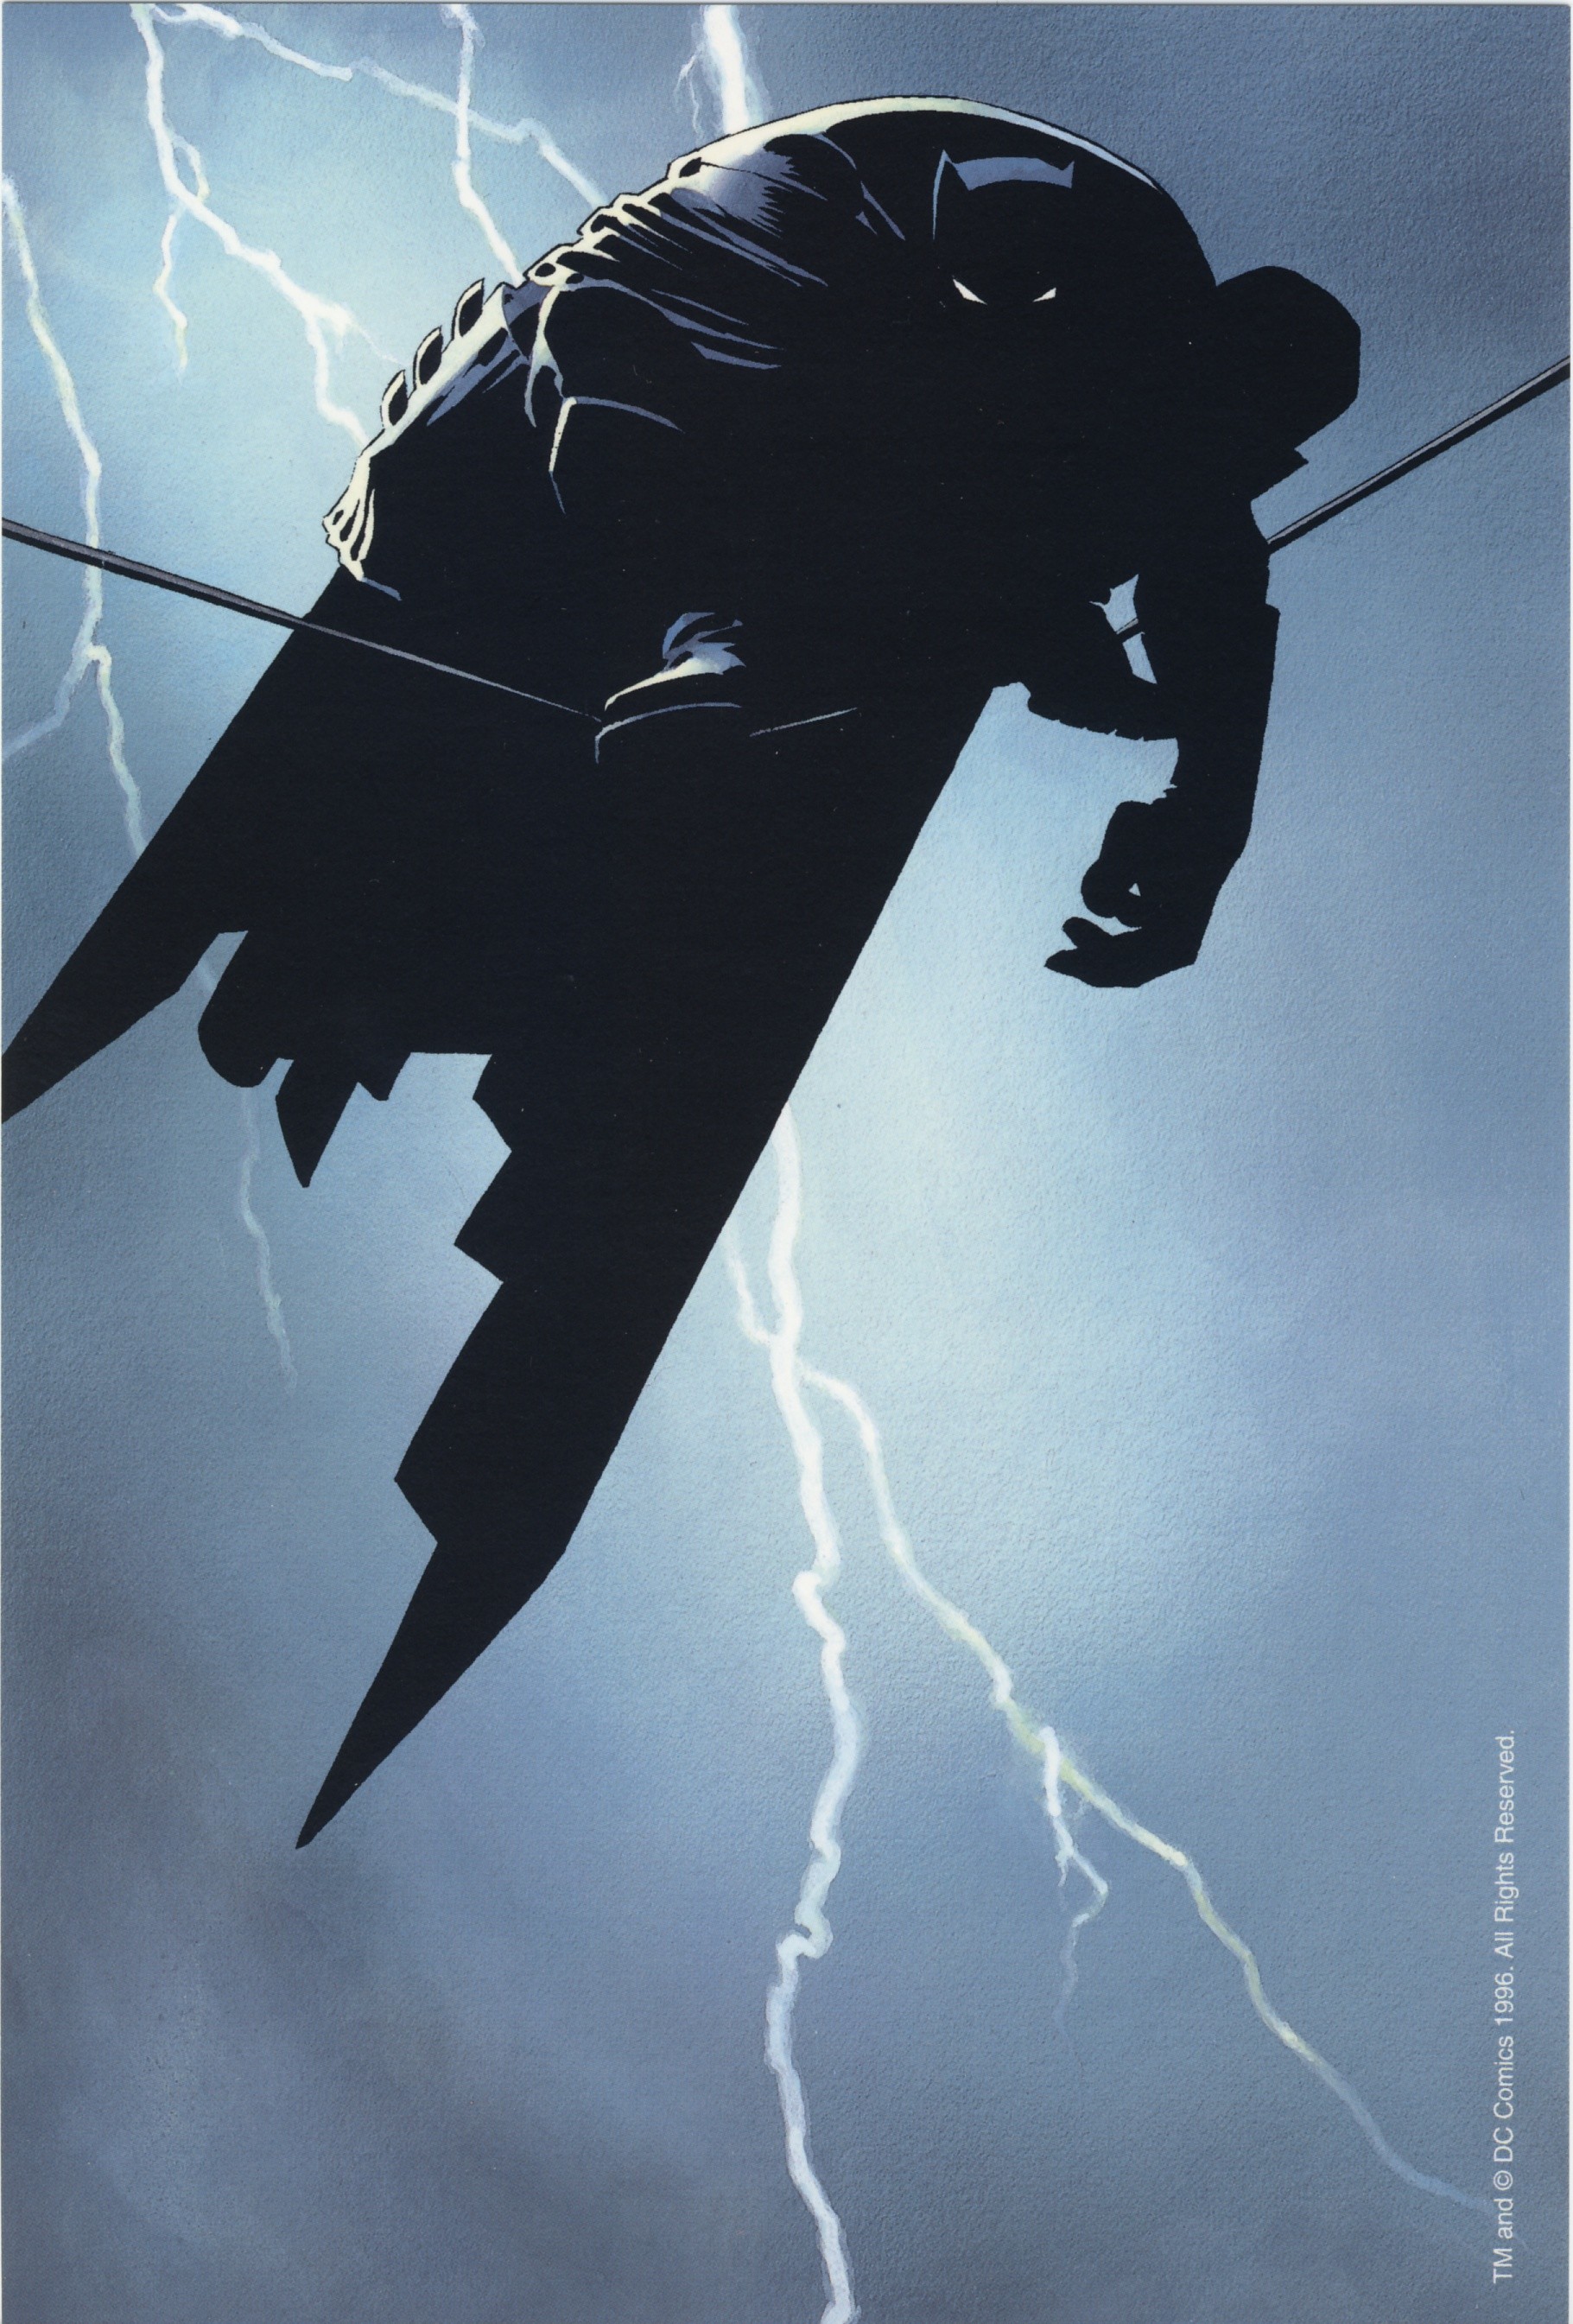 Dark Knight – Frank Miller – this poster got me back into batman after the terrible movies came out